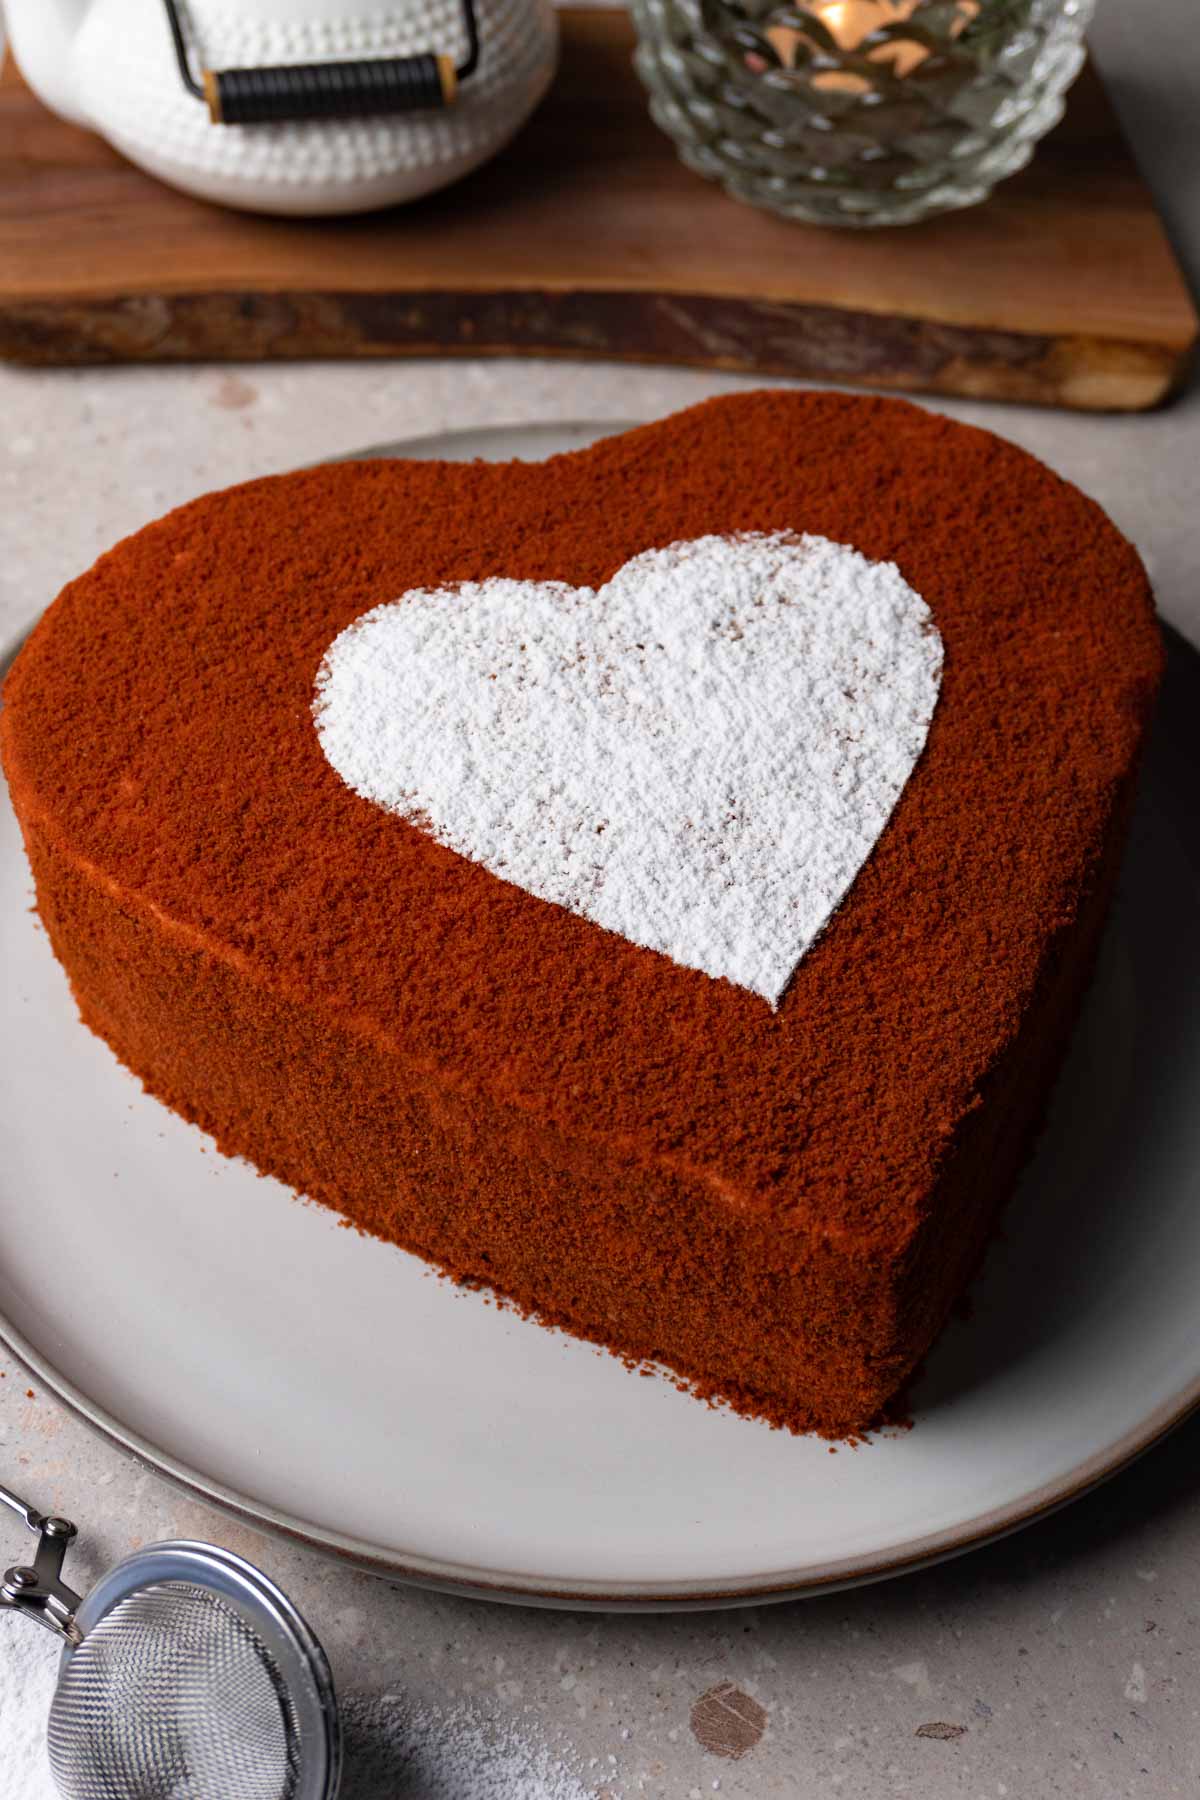 Red velvet heart shaped cake decorated with a white powder sugar heart on top on a large round plate..